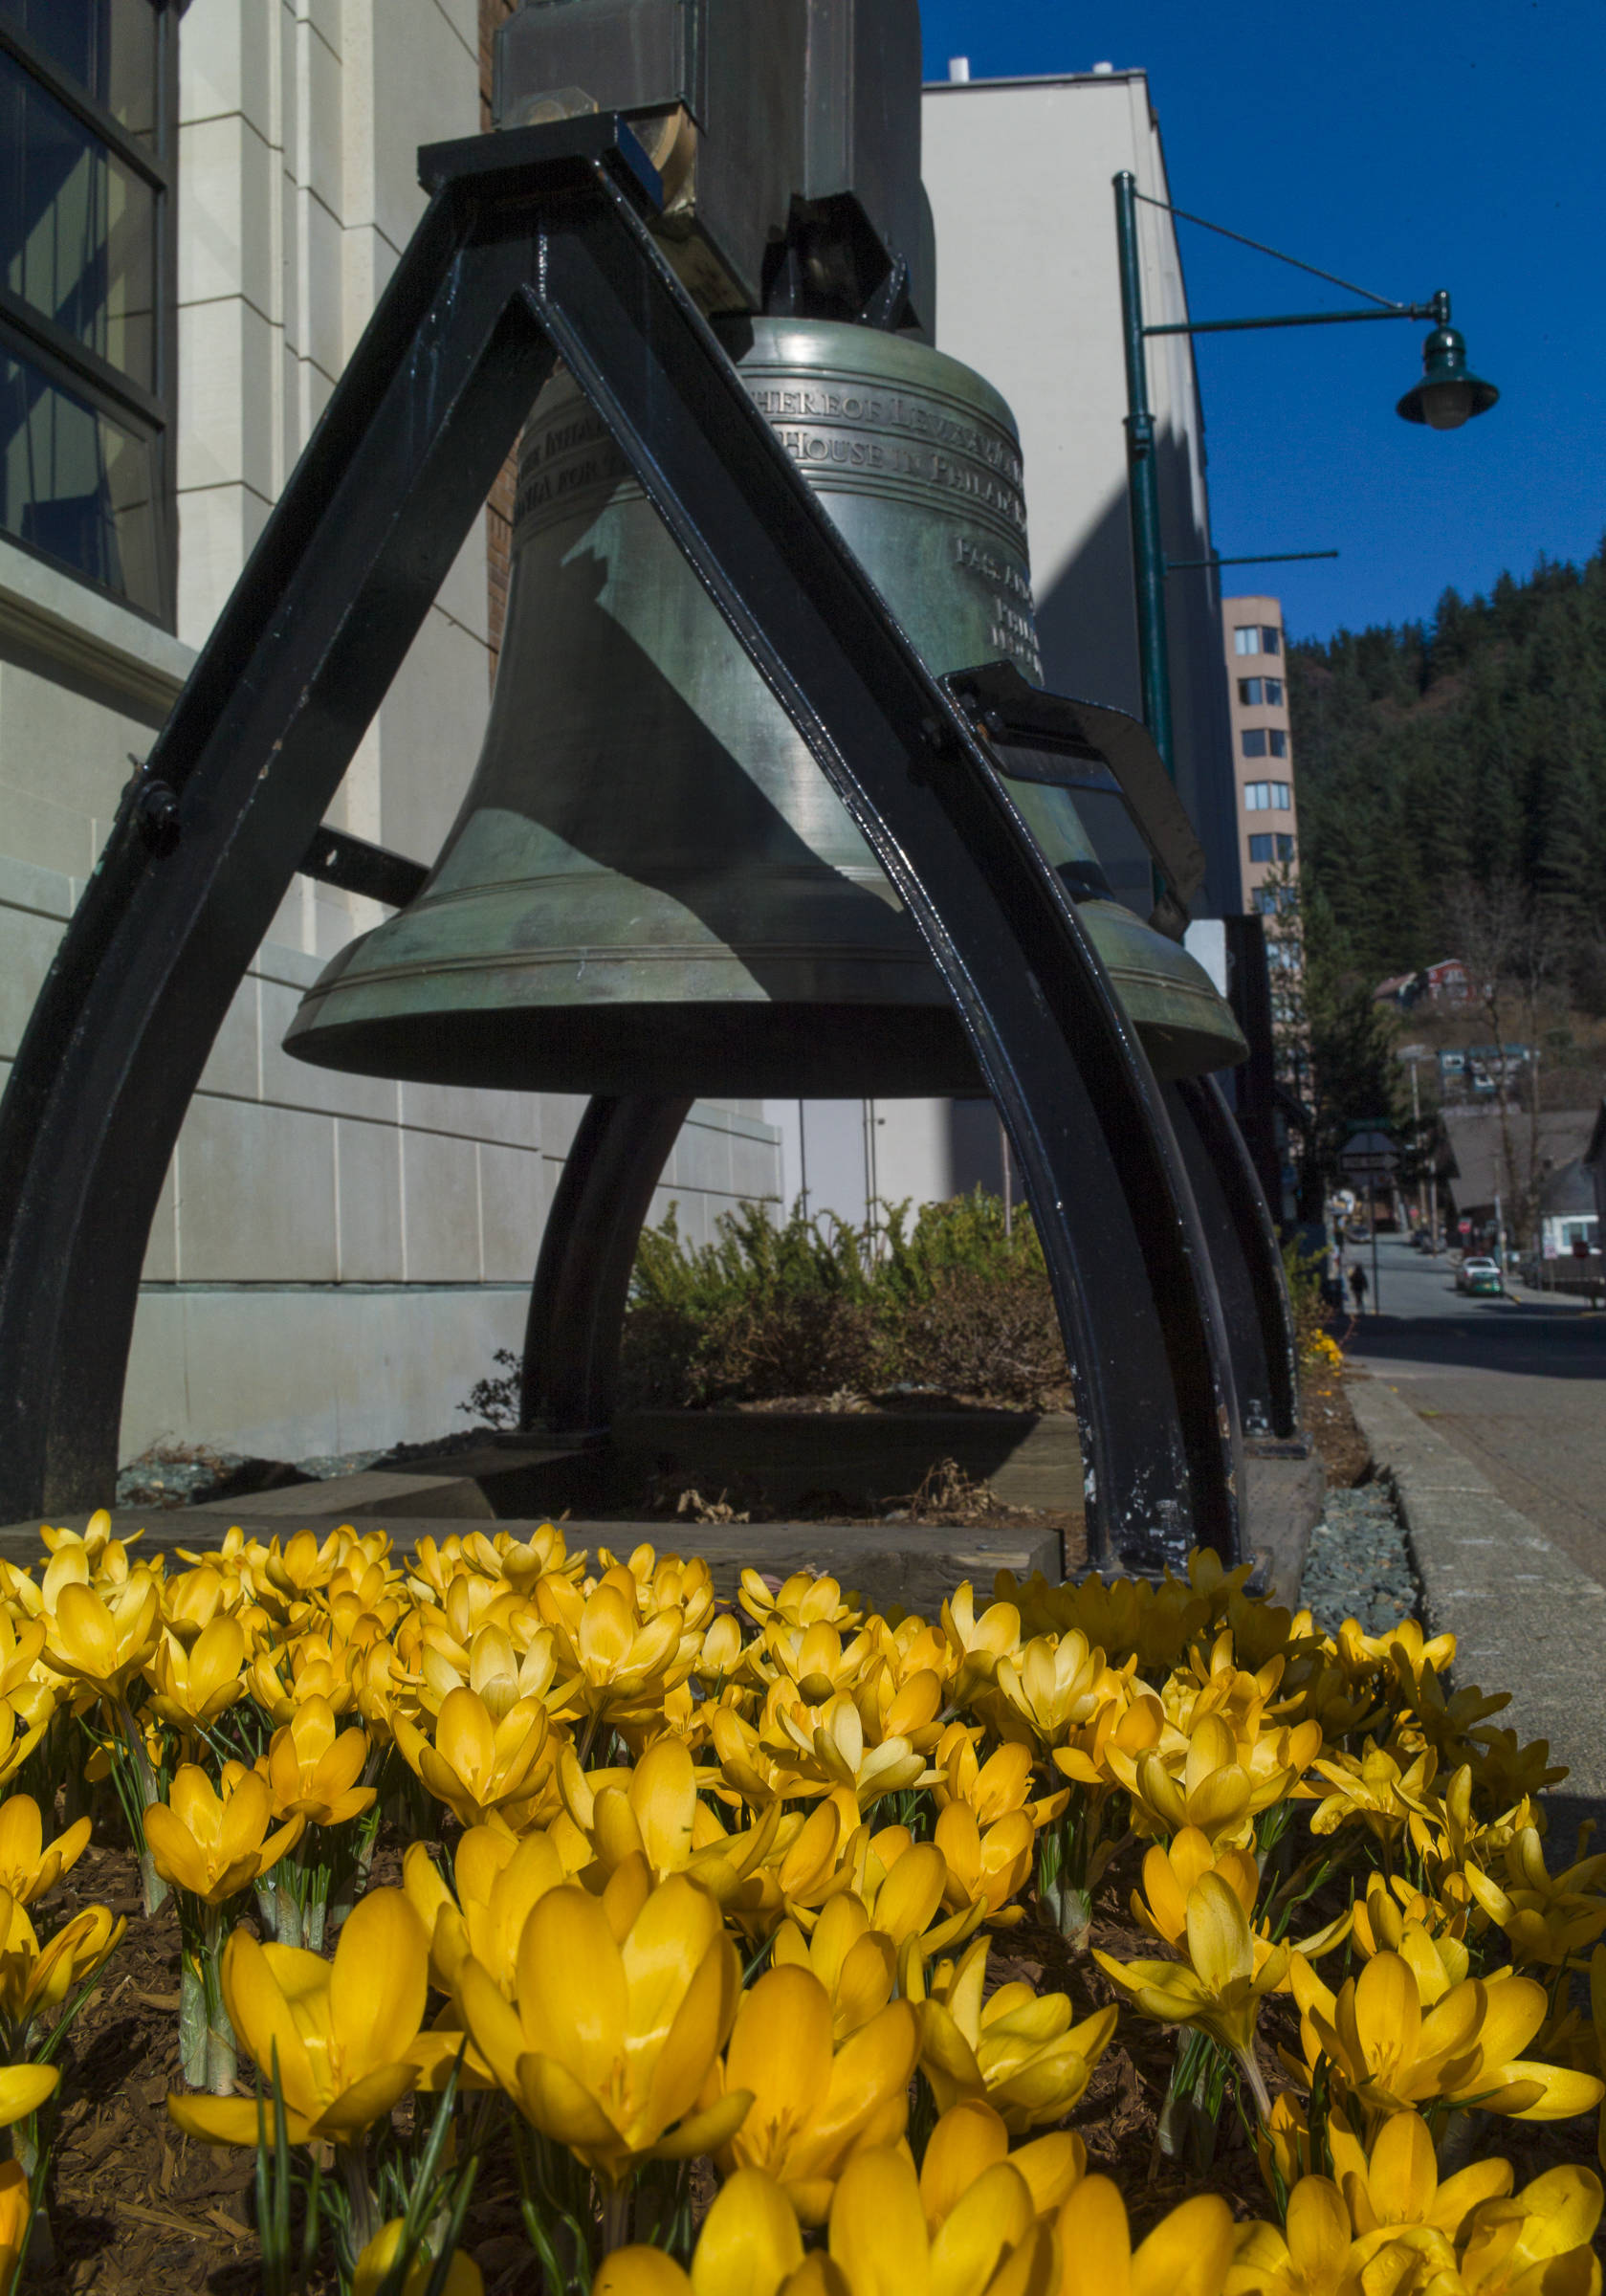 Crocuses pop up near a copy of the Liberty Bell in front of the Alaska State Capitol on Friday, March 29, 2019. (MIchael Penn | Juneau Empire)